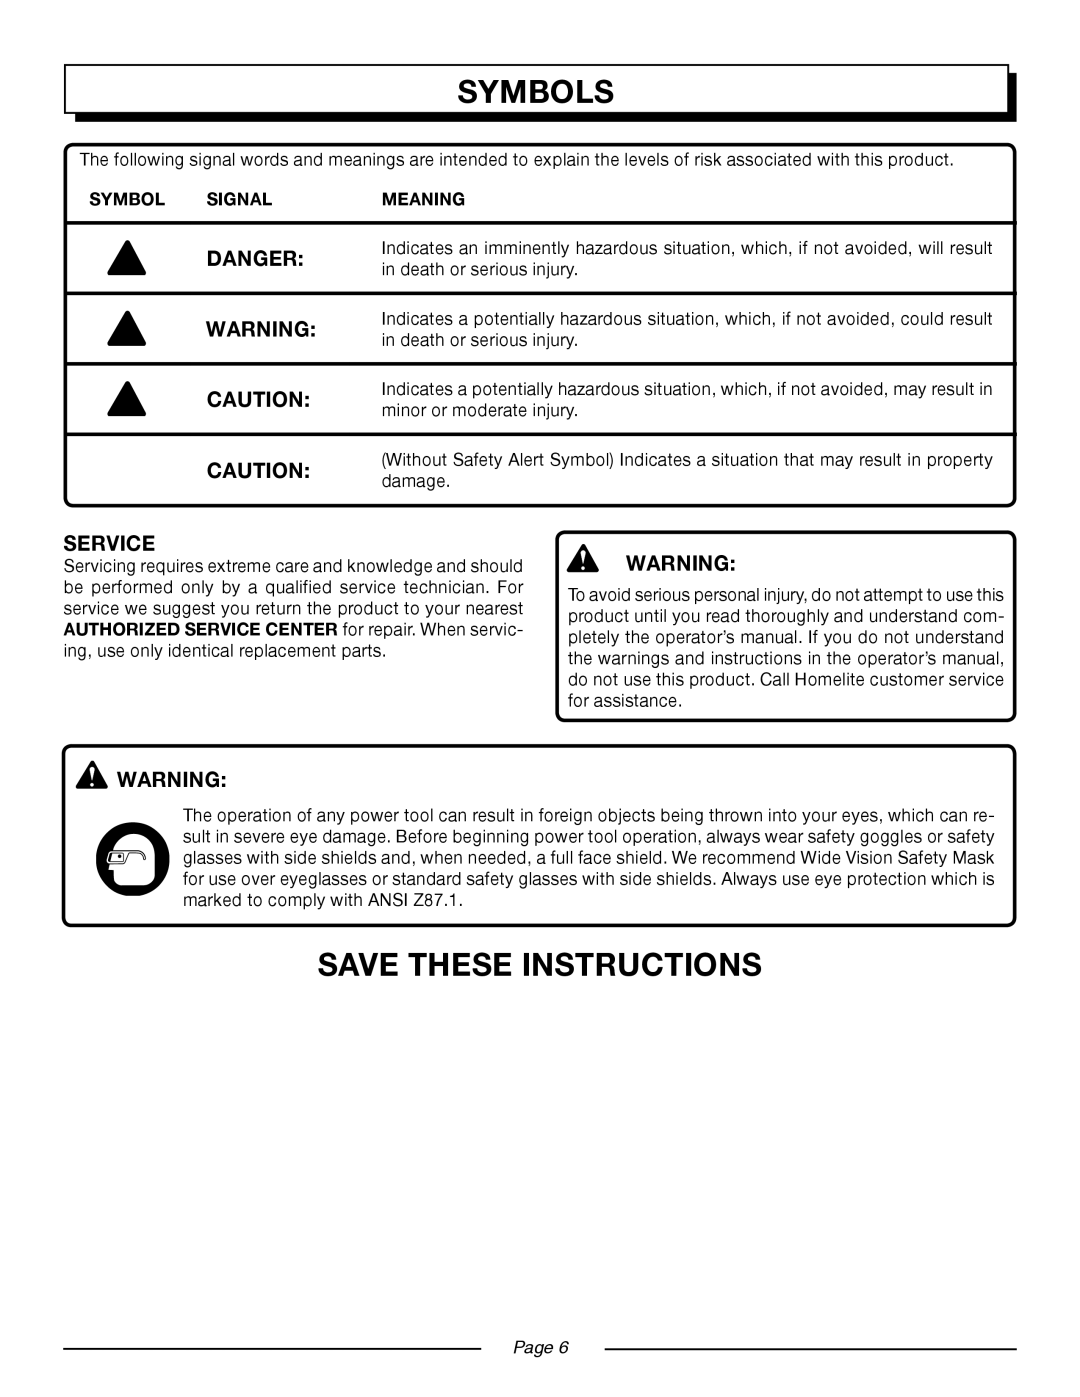 Homelite UT13218, UT13220 manual Save These Instructions, Danger, Service, Symbols, Signal, Meaning, Page 